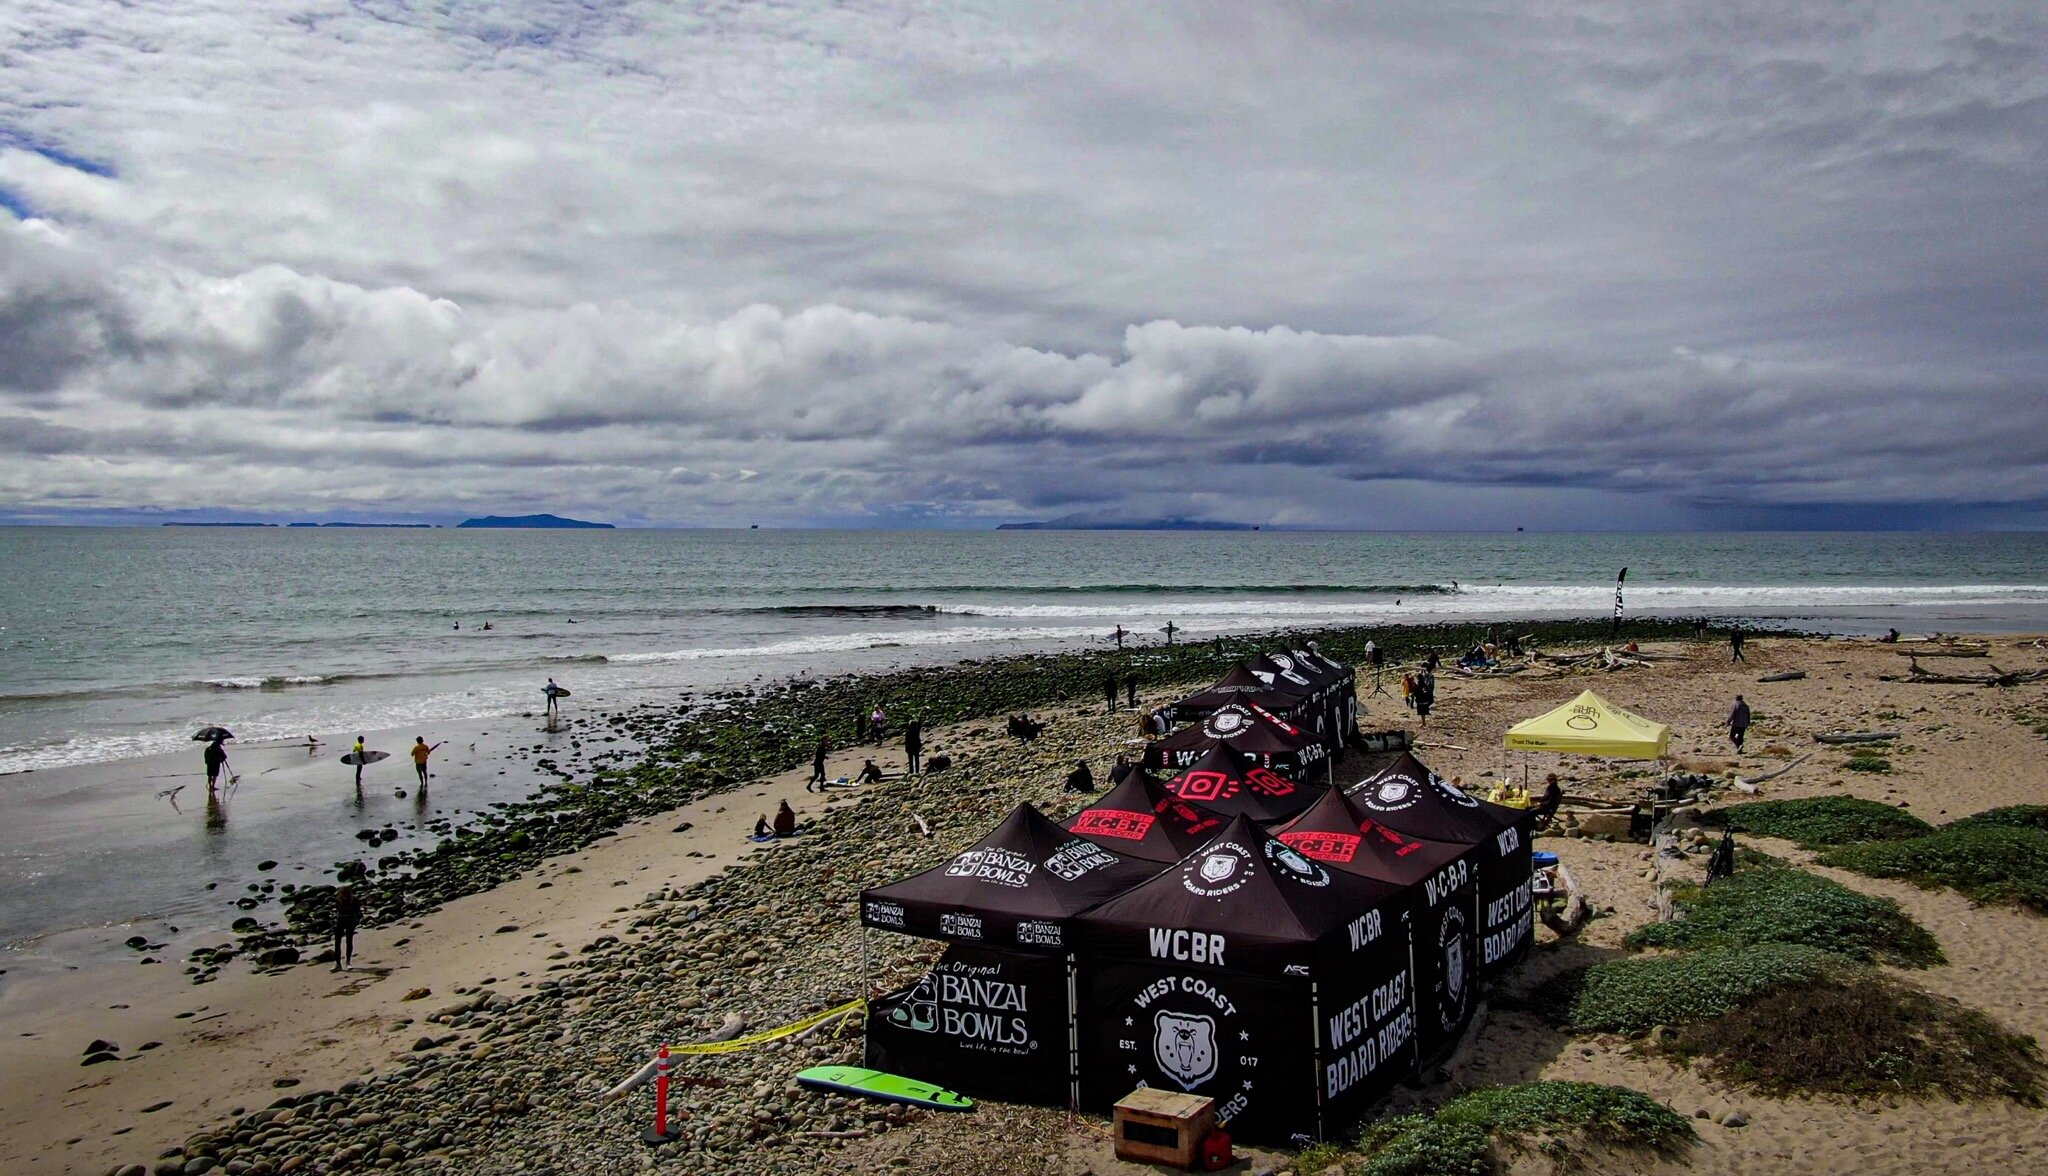 WCBR event set-up at Surfer’s Point in Ventura - Abe Alarcon